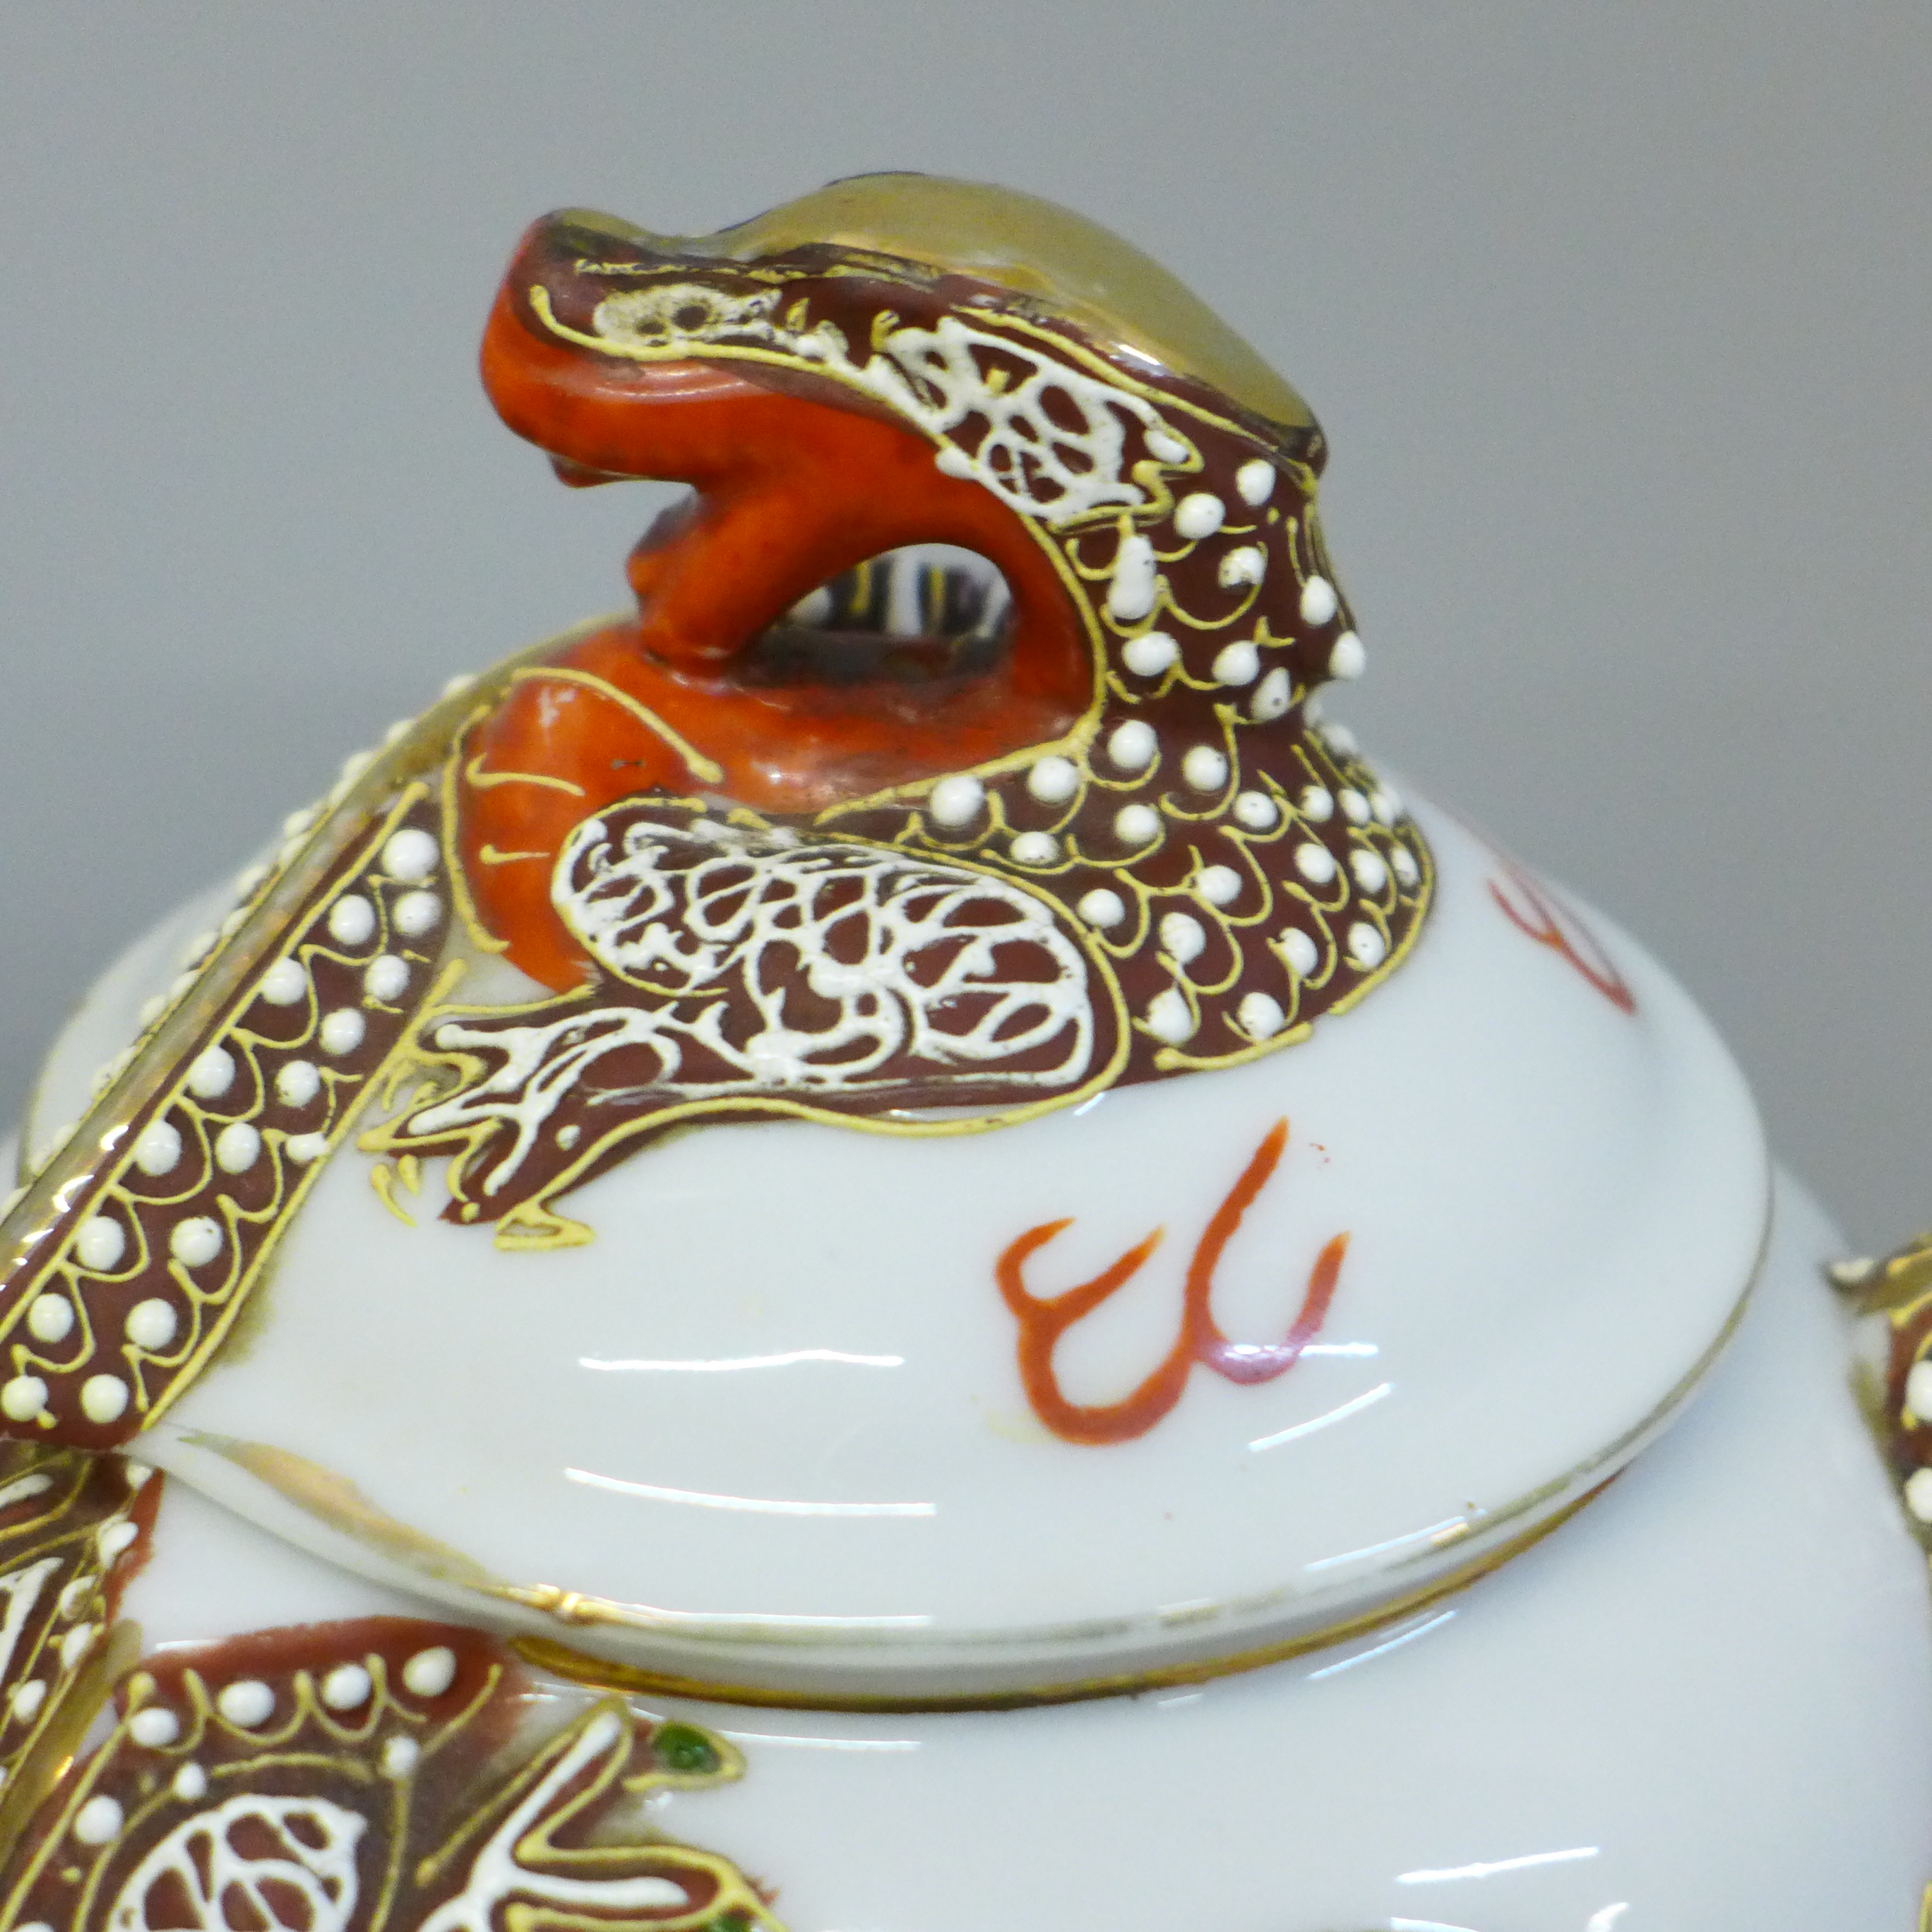 Vintage Japanese Moriage Dragonware; china teapot and a two-handled jar with lid - Image 2 of 3